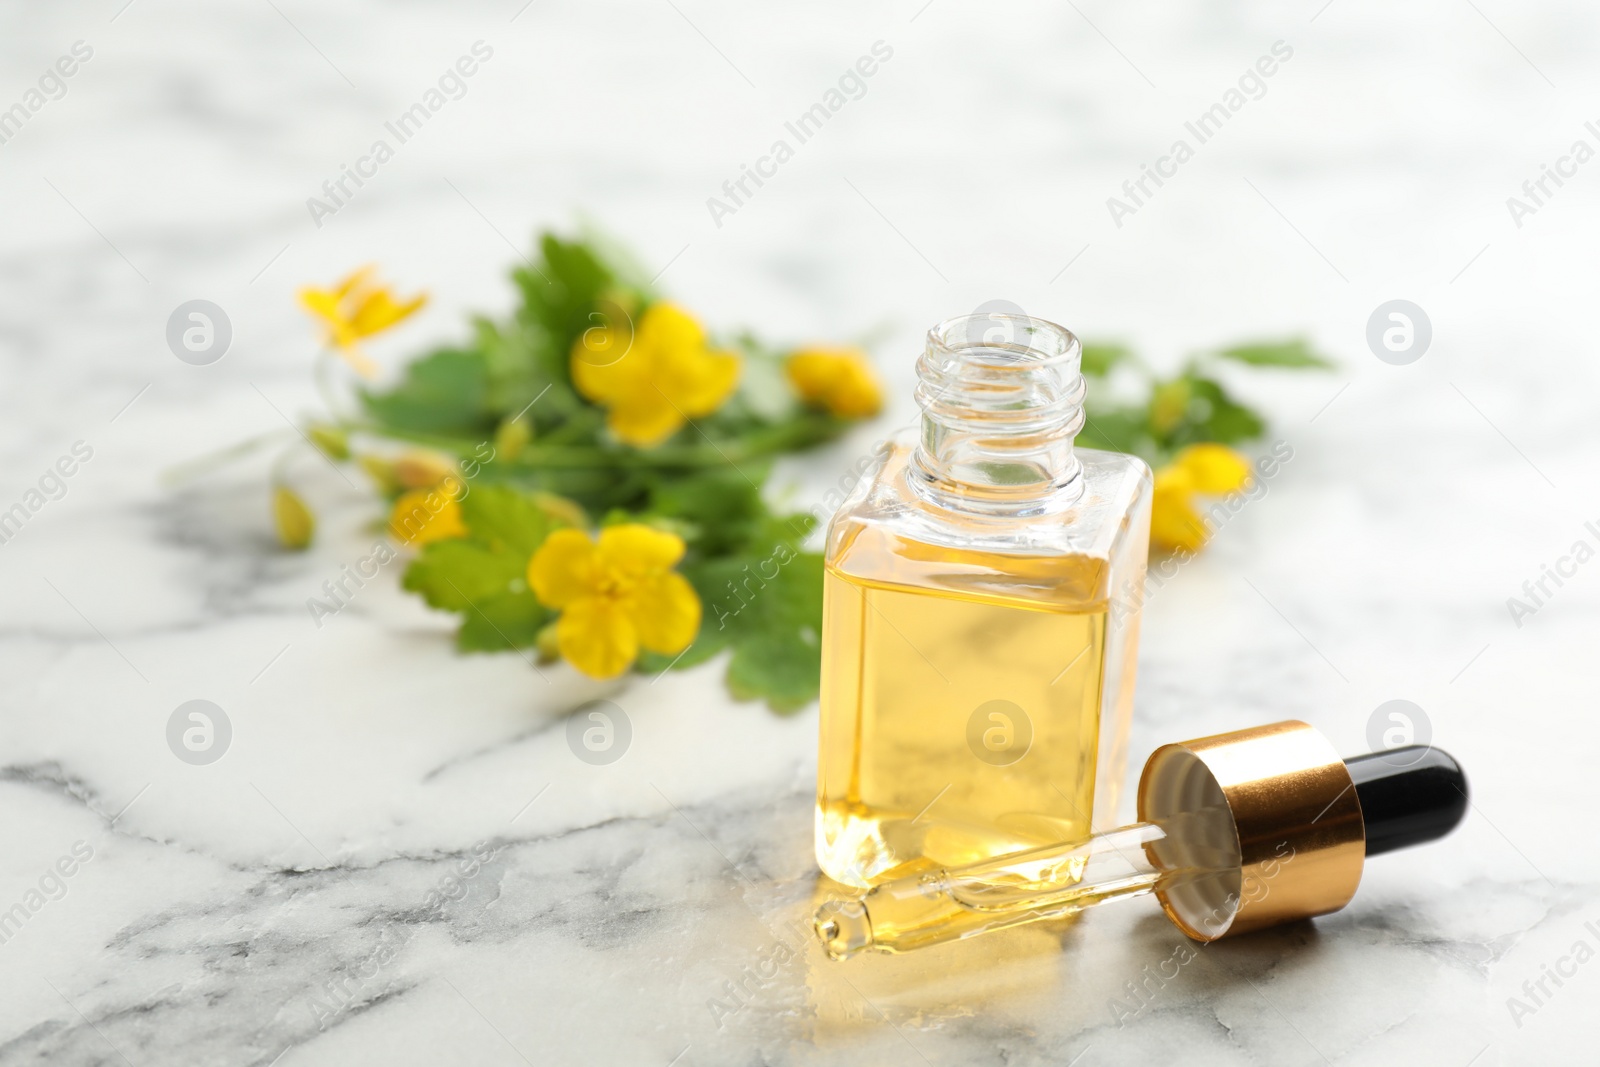 Photo of Bottle of natural celandine oil near flowers on white marble table. Space for text